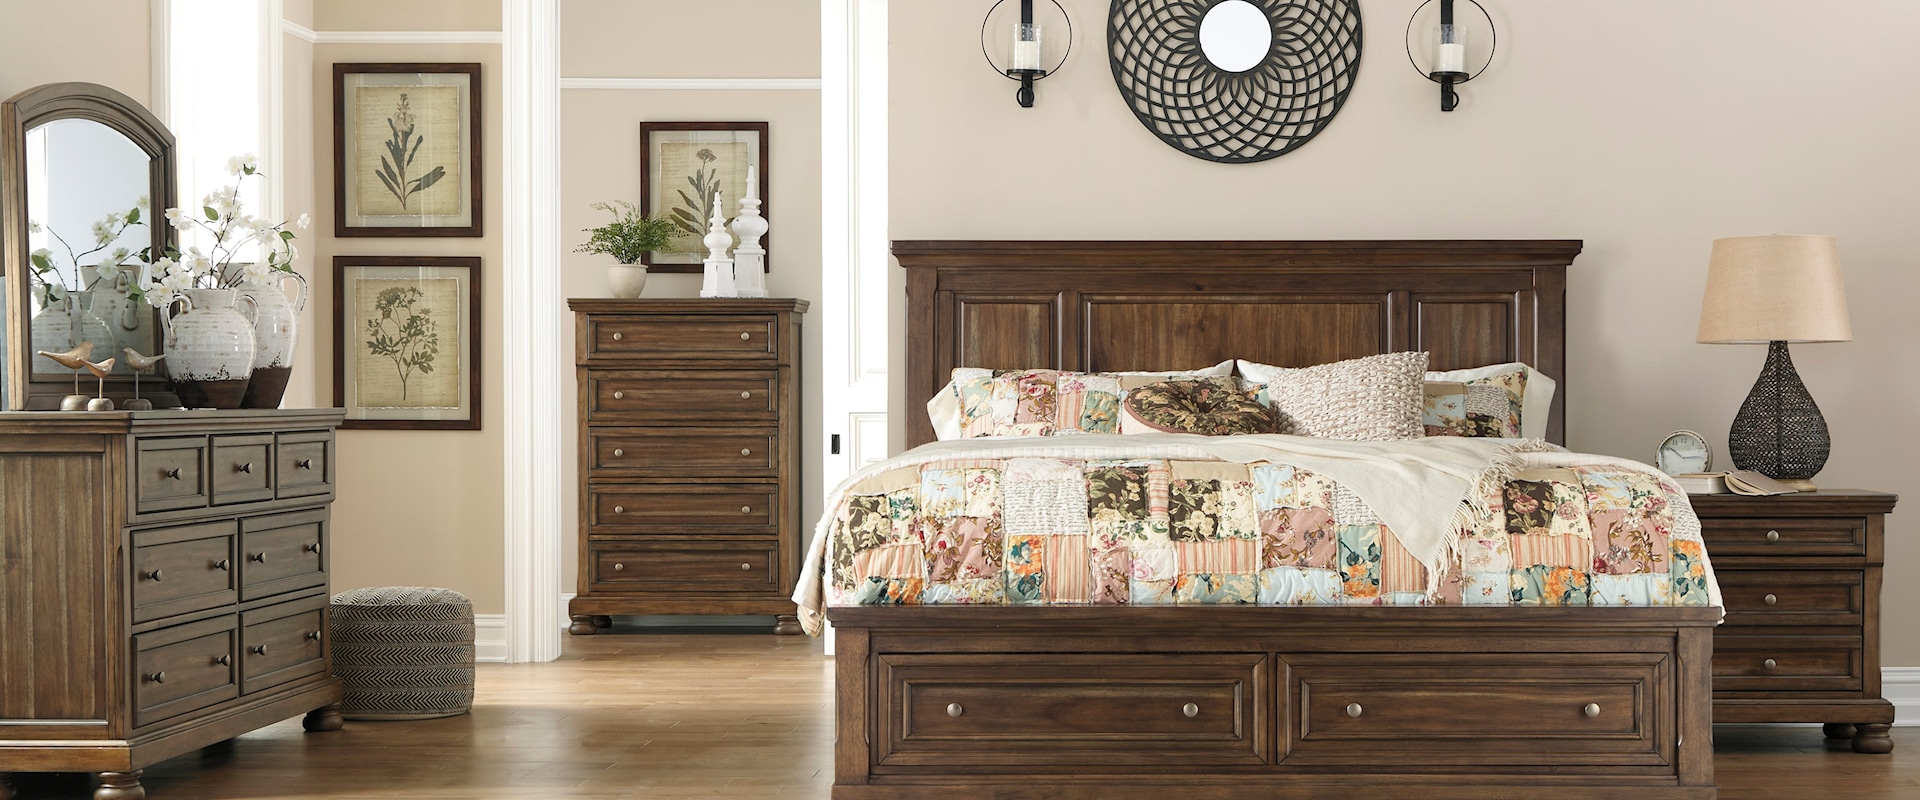 3 Piece Queen Panel Bed with 2 Storage Drawers, 7 Drawer Dresser and 2 Drawer Nightstand Set